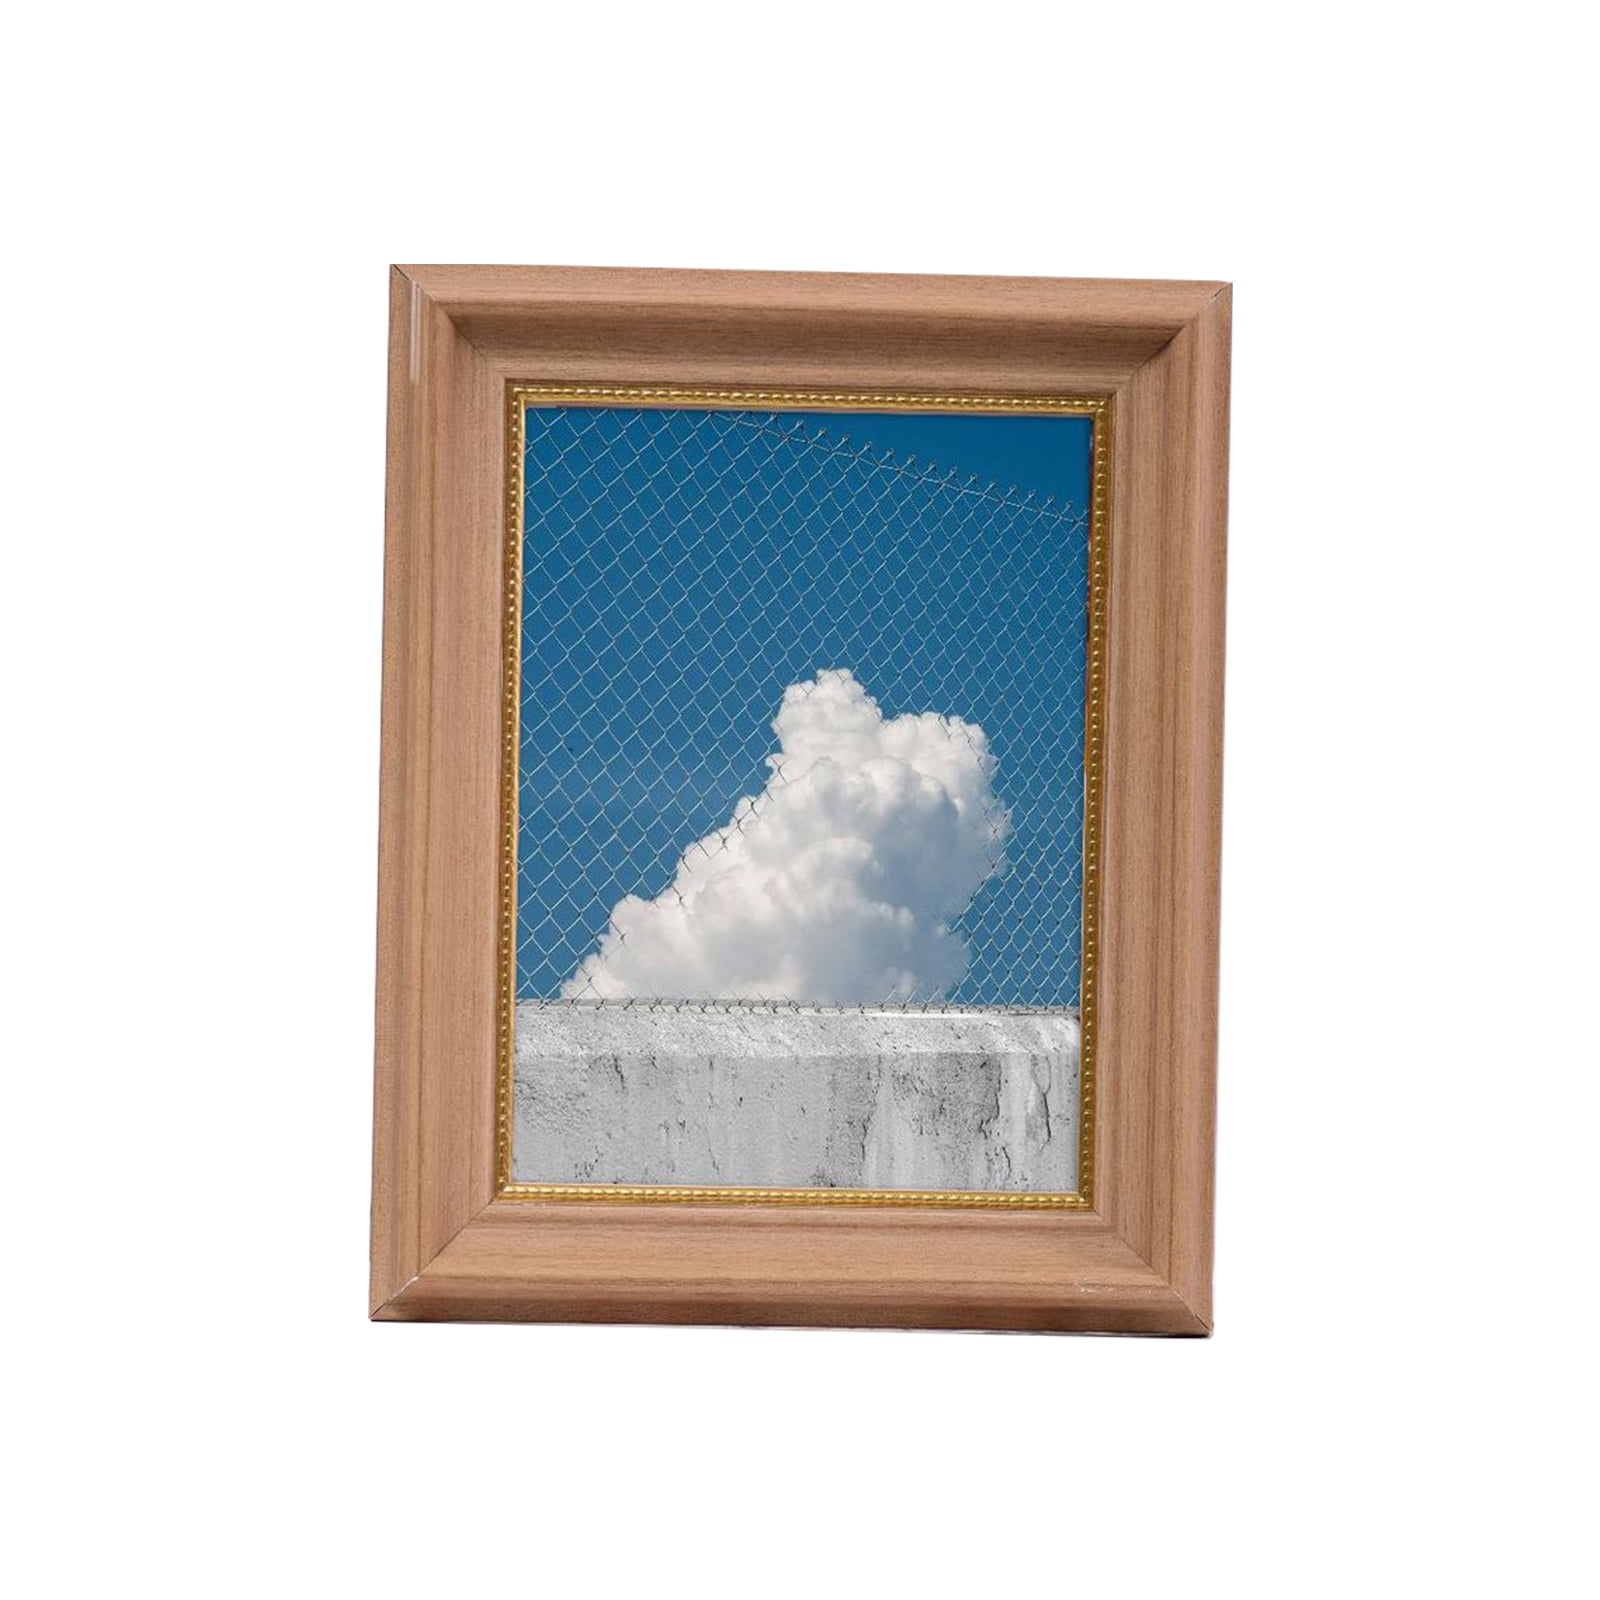 3.5x5 inch Picture Frame Made of Solid Wood High Definition Glass for Table Top Display and Wall Mounting Photo Frame Brown